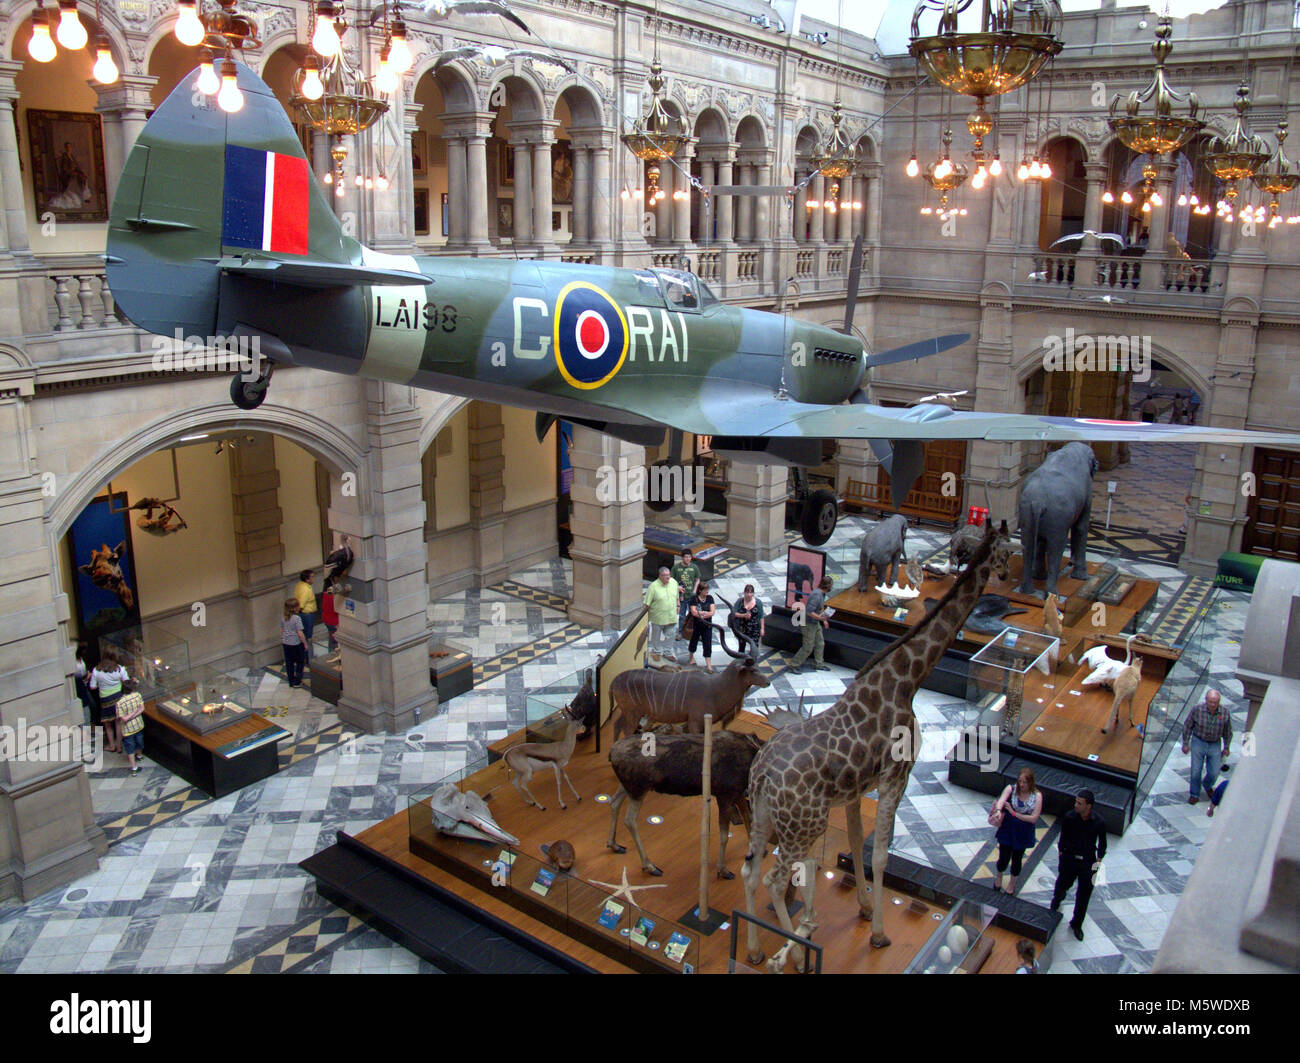 Kelvingrove Art Gallery and Museum “the Glasgow Spitfire” hanging from ceiling of one of the grand halls containing tourists wildlife animals exhibits Stock Photo